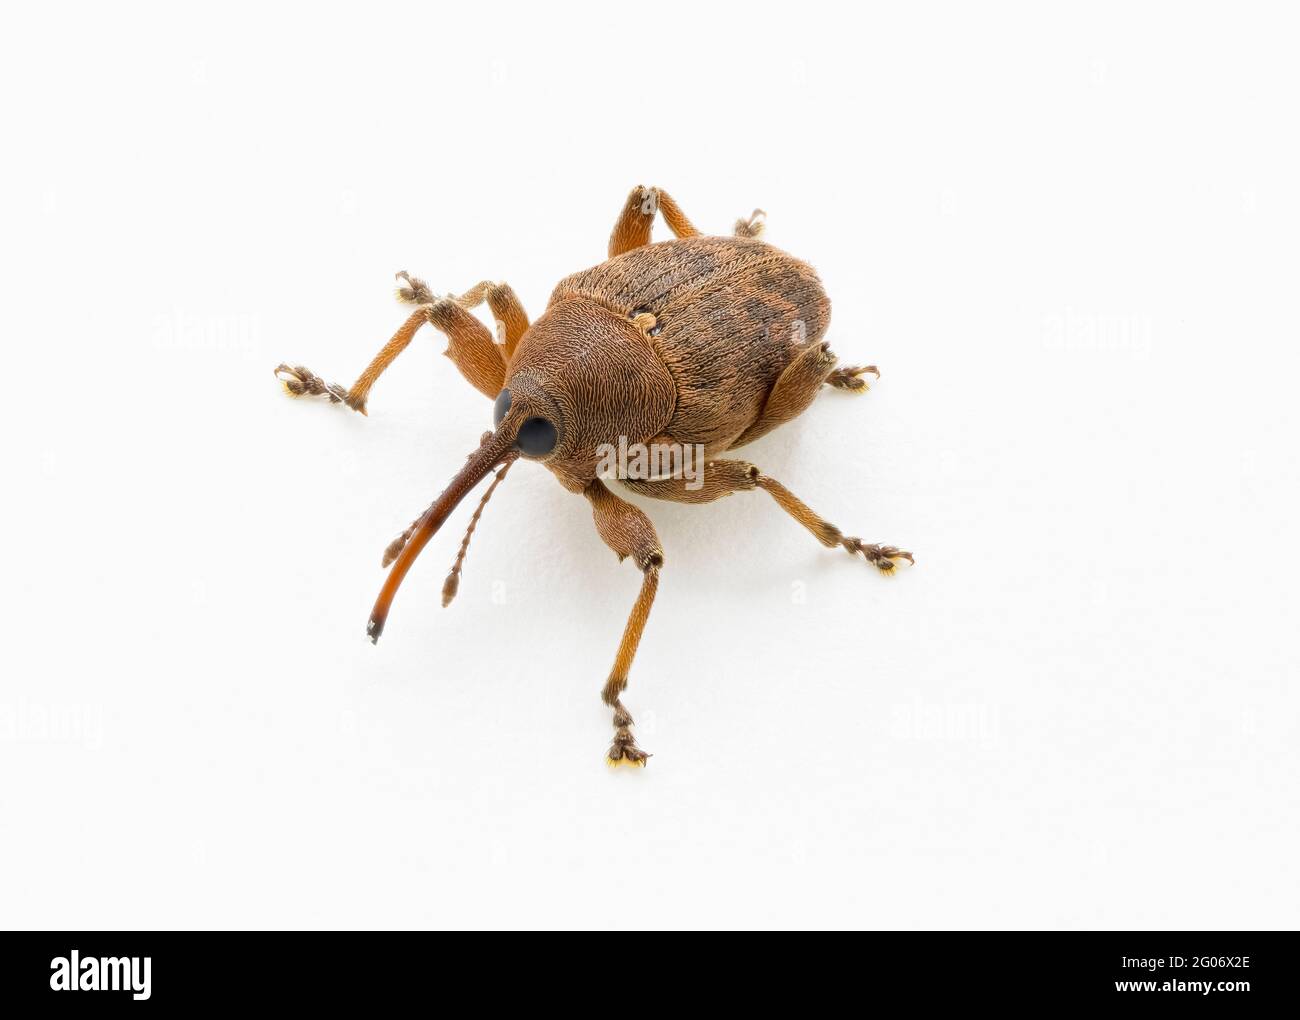 Curculio glandium (gland weevil), a medium-sized beetle (bug) with an especially elongated snout, found in an oak tree in a Surrey garden Stock Photo